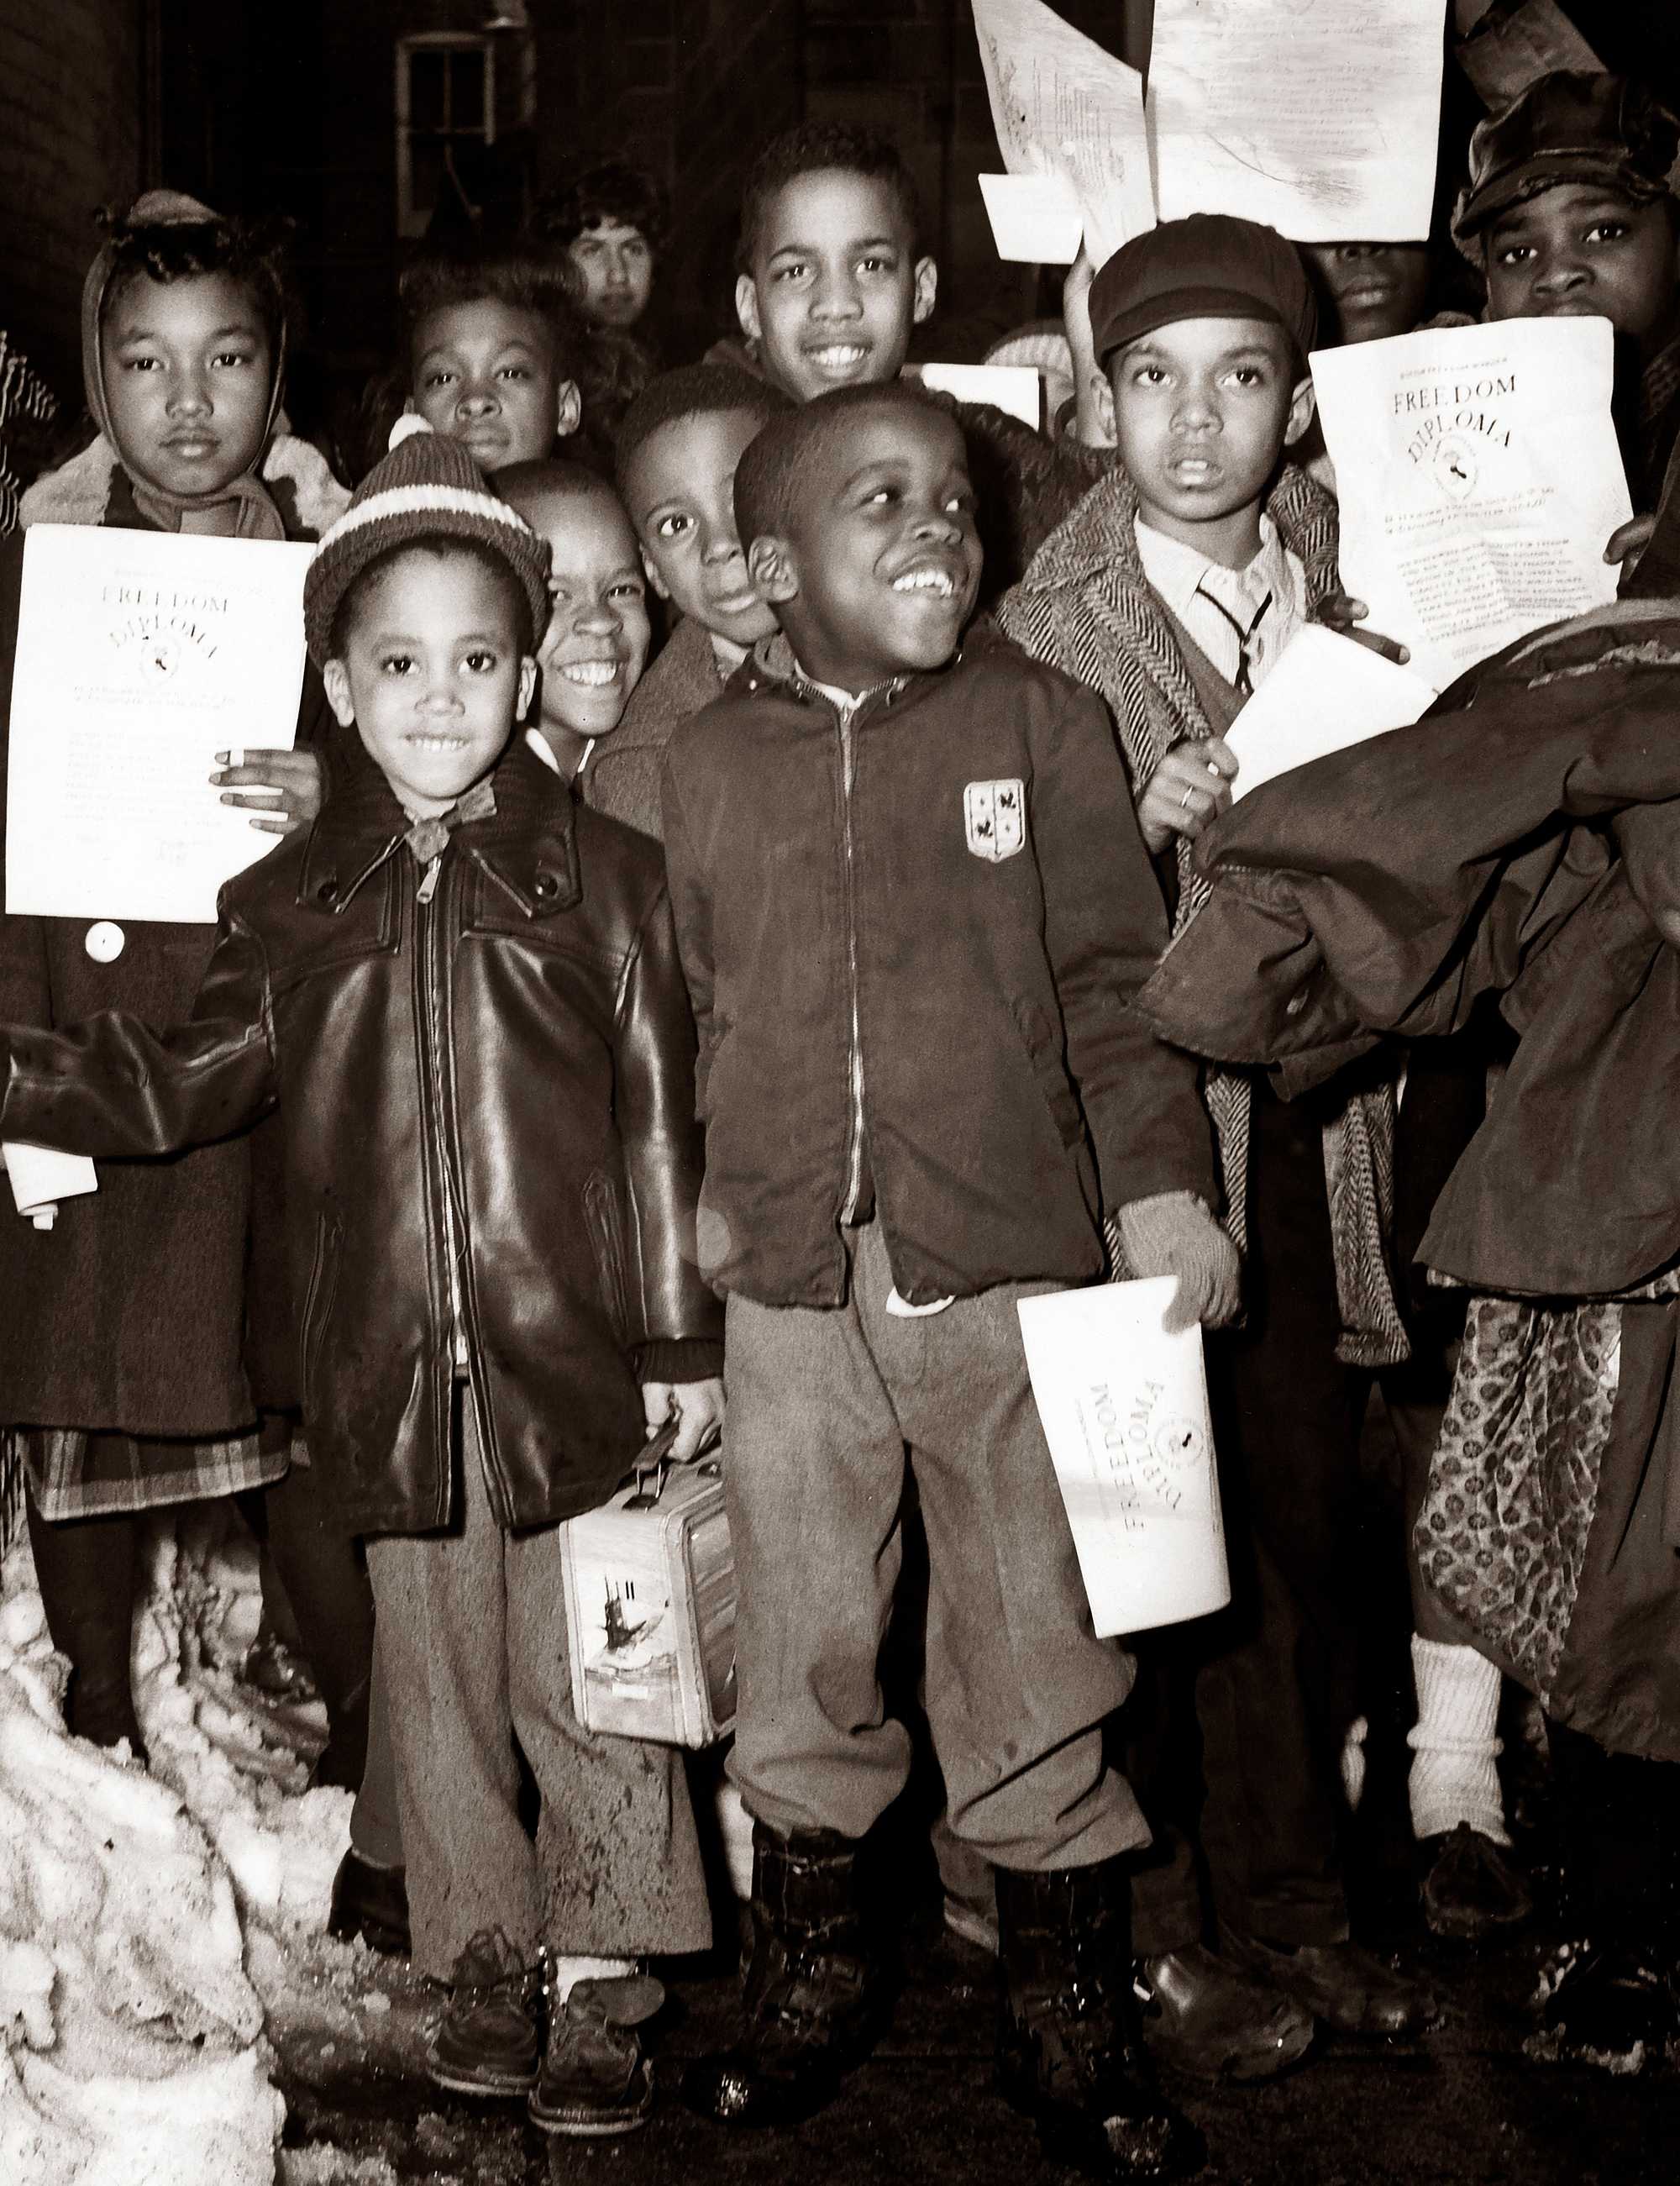 Students posed with their diplomas after attending a Freedom School gathering at St. Mark’s Social Center on Feb. 26, 1964. (Louis Russo/Globe Staff)

